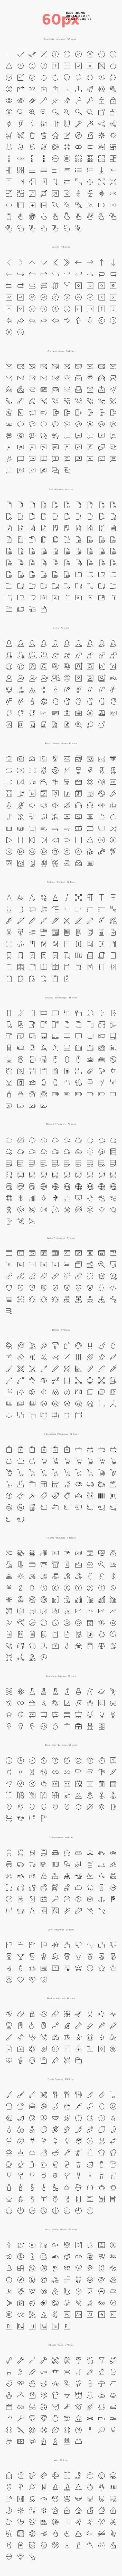 Bundle of 60x different simple line icons pro on a gray background.